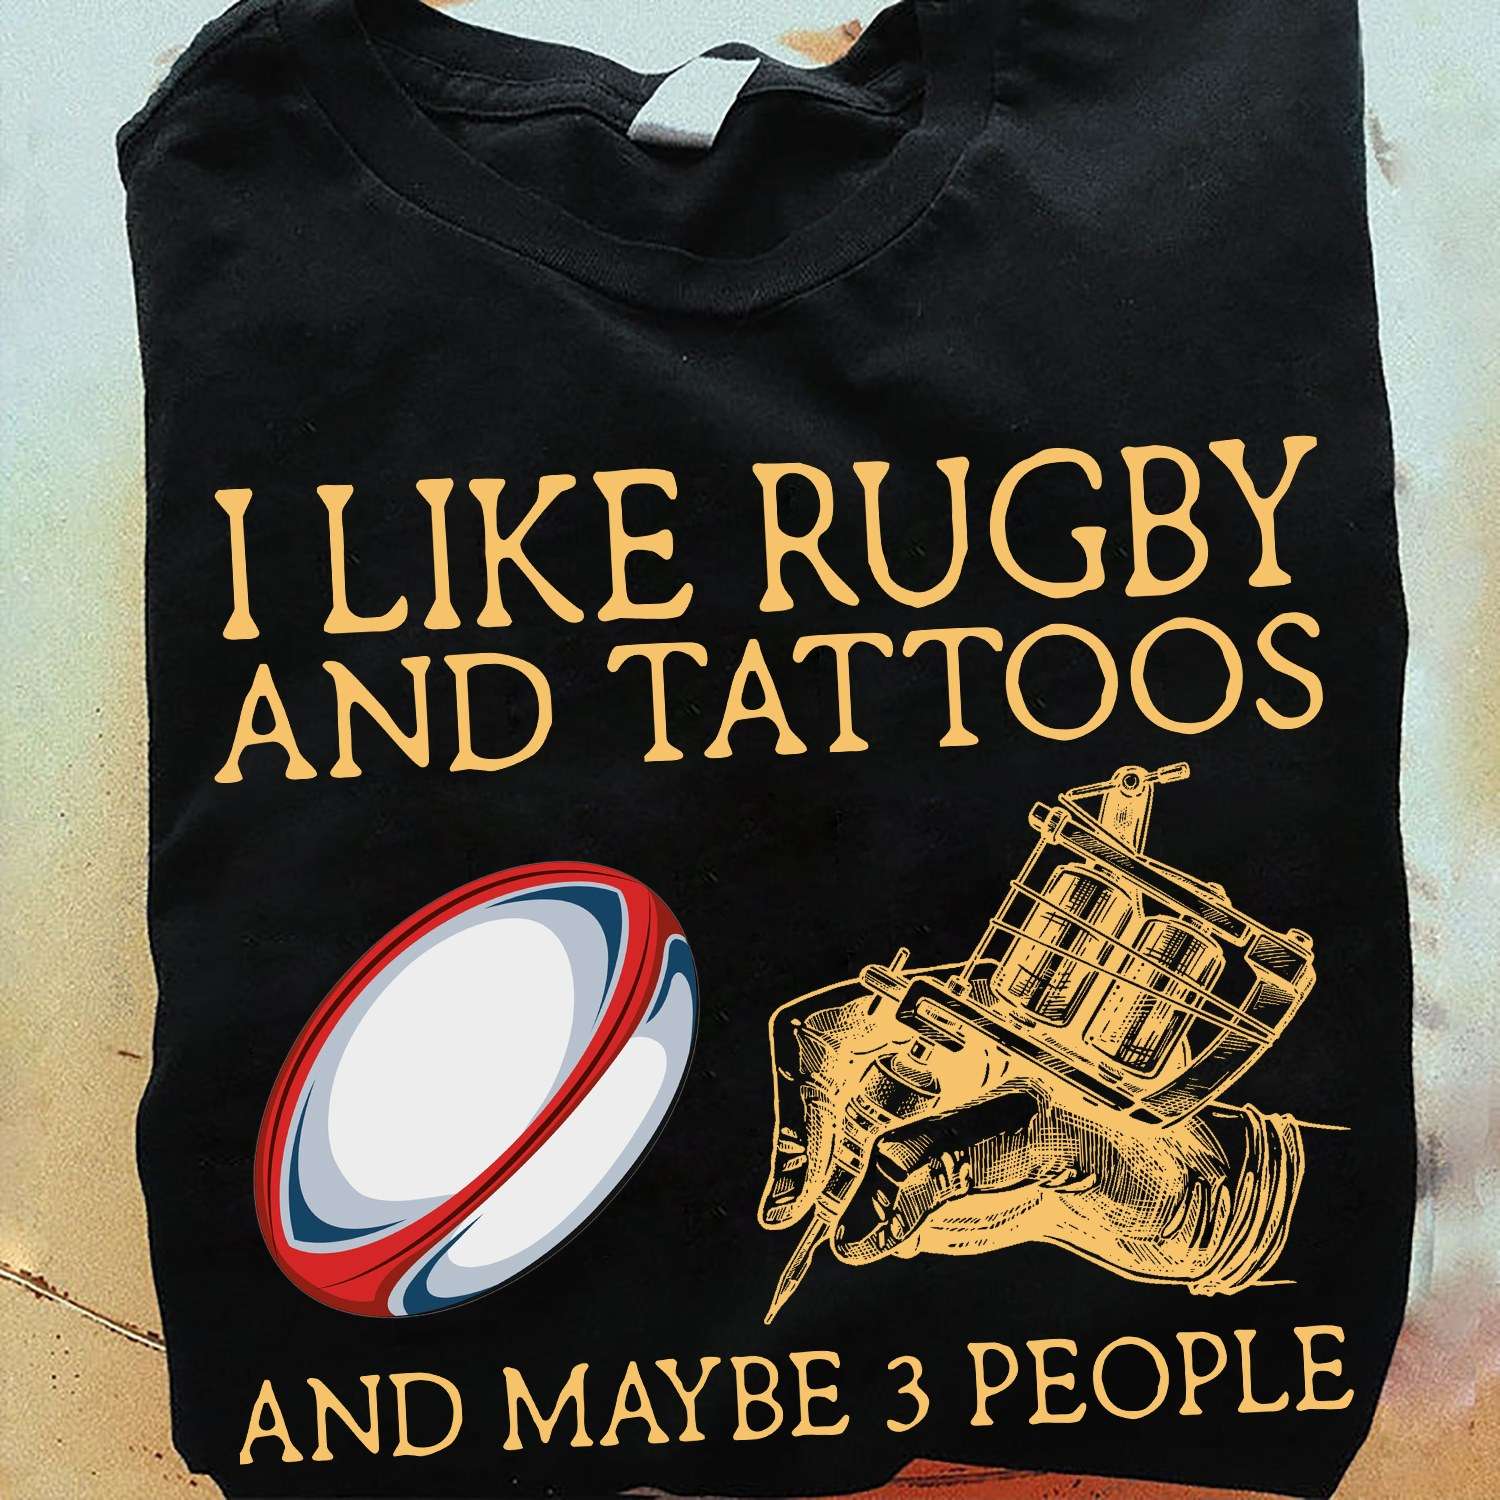 Rugby Tattoos - I like rugby and tattoos and maybe 3 people